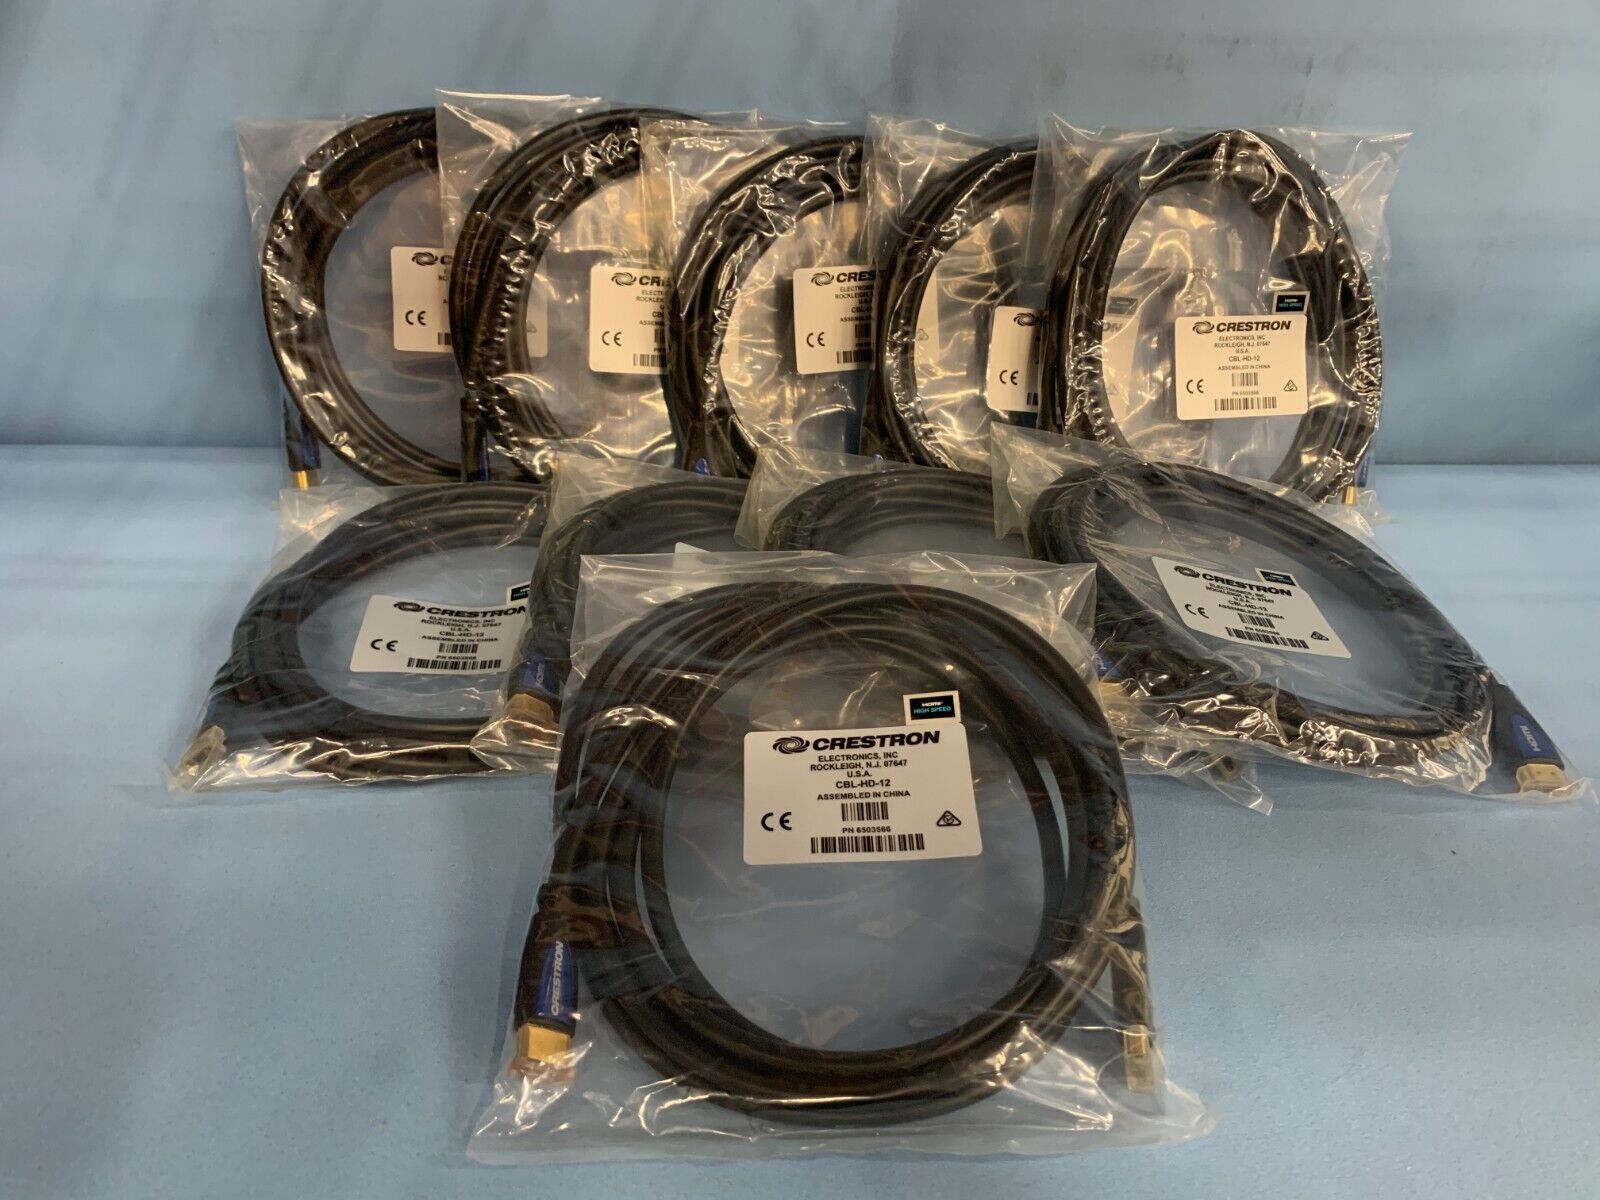 Crestron CBL-HD-12 - 12' HDMI Interface Cable Part # 6503566 - LOT of 10 Cables